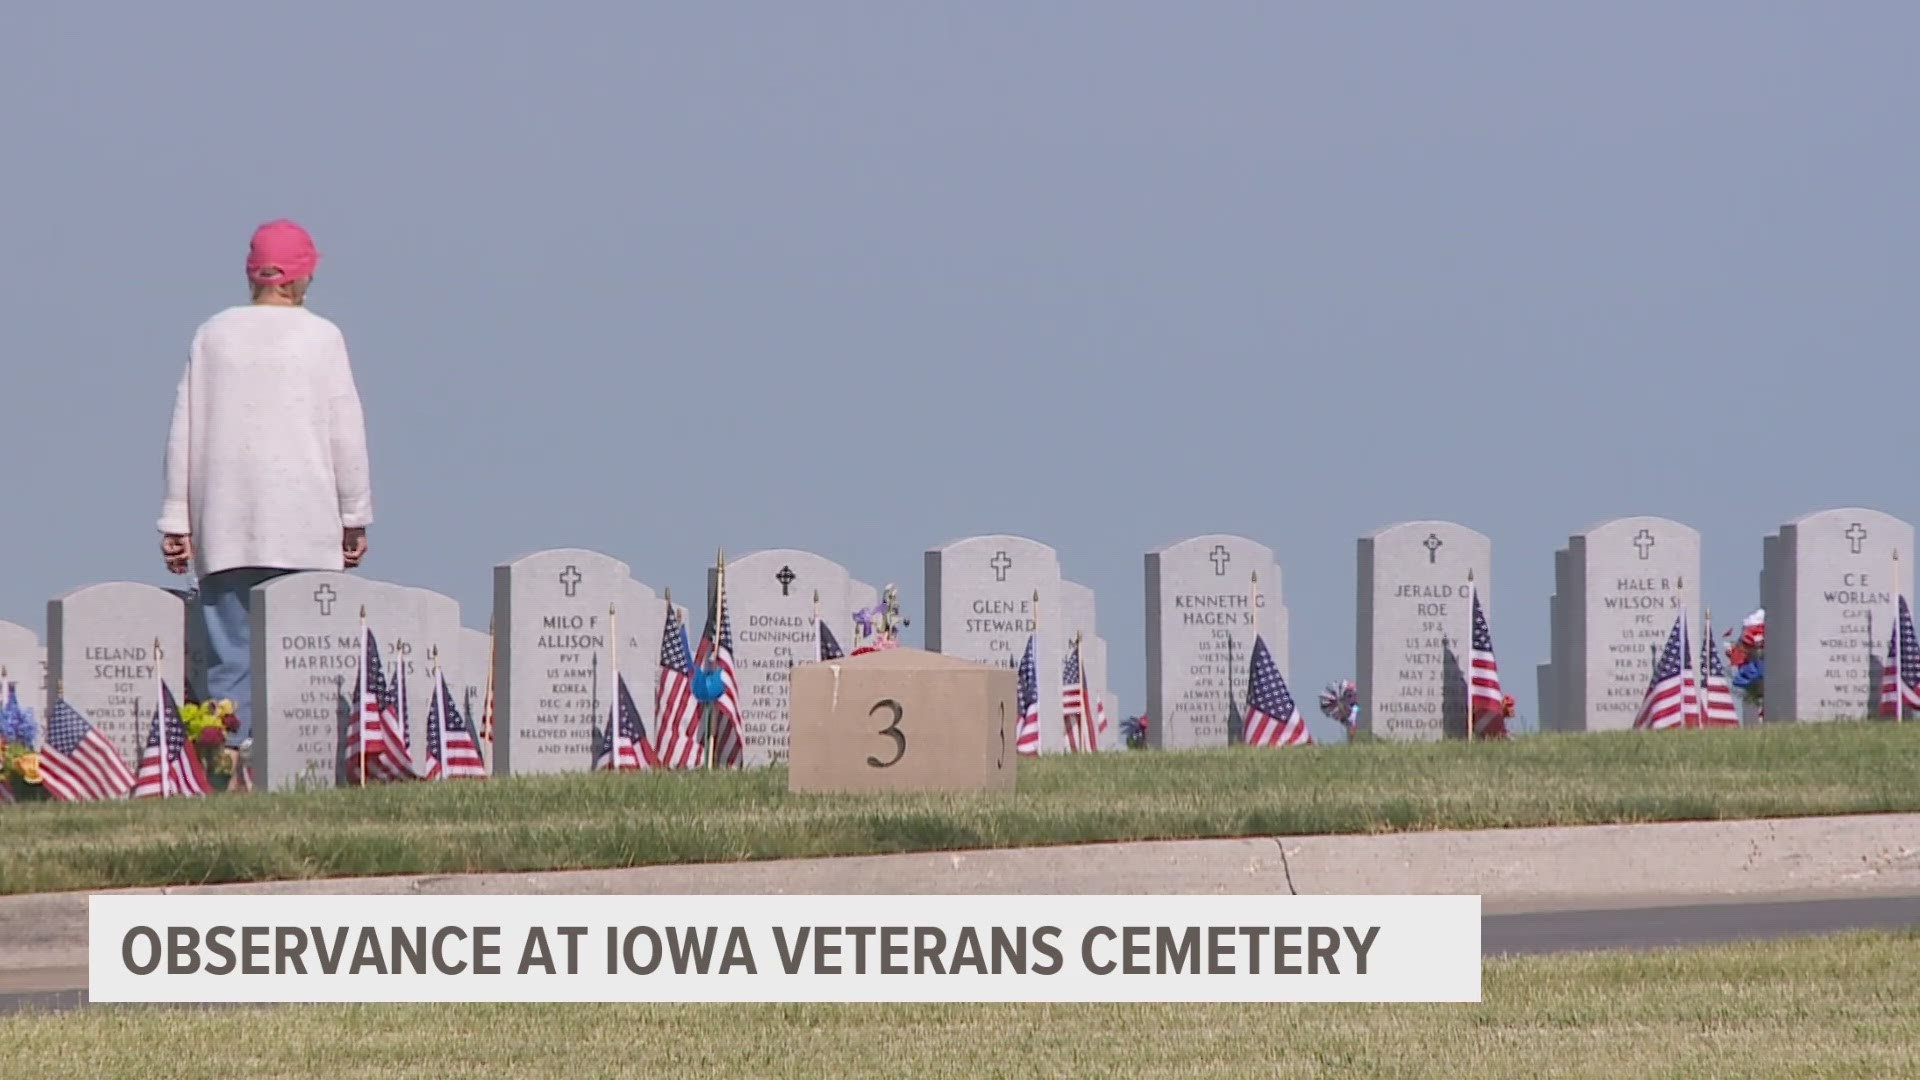 Gov. Kim Reynolds honored veterans at the Iowa Veterans Cemetery. Meanwhile, in West Des Moines, McClaren's Resthaven Chapel and Cemetery held it's own observance.